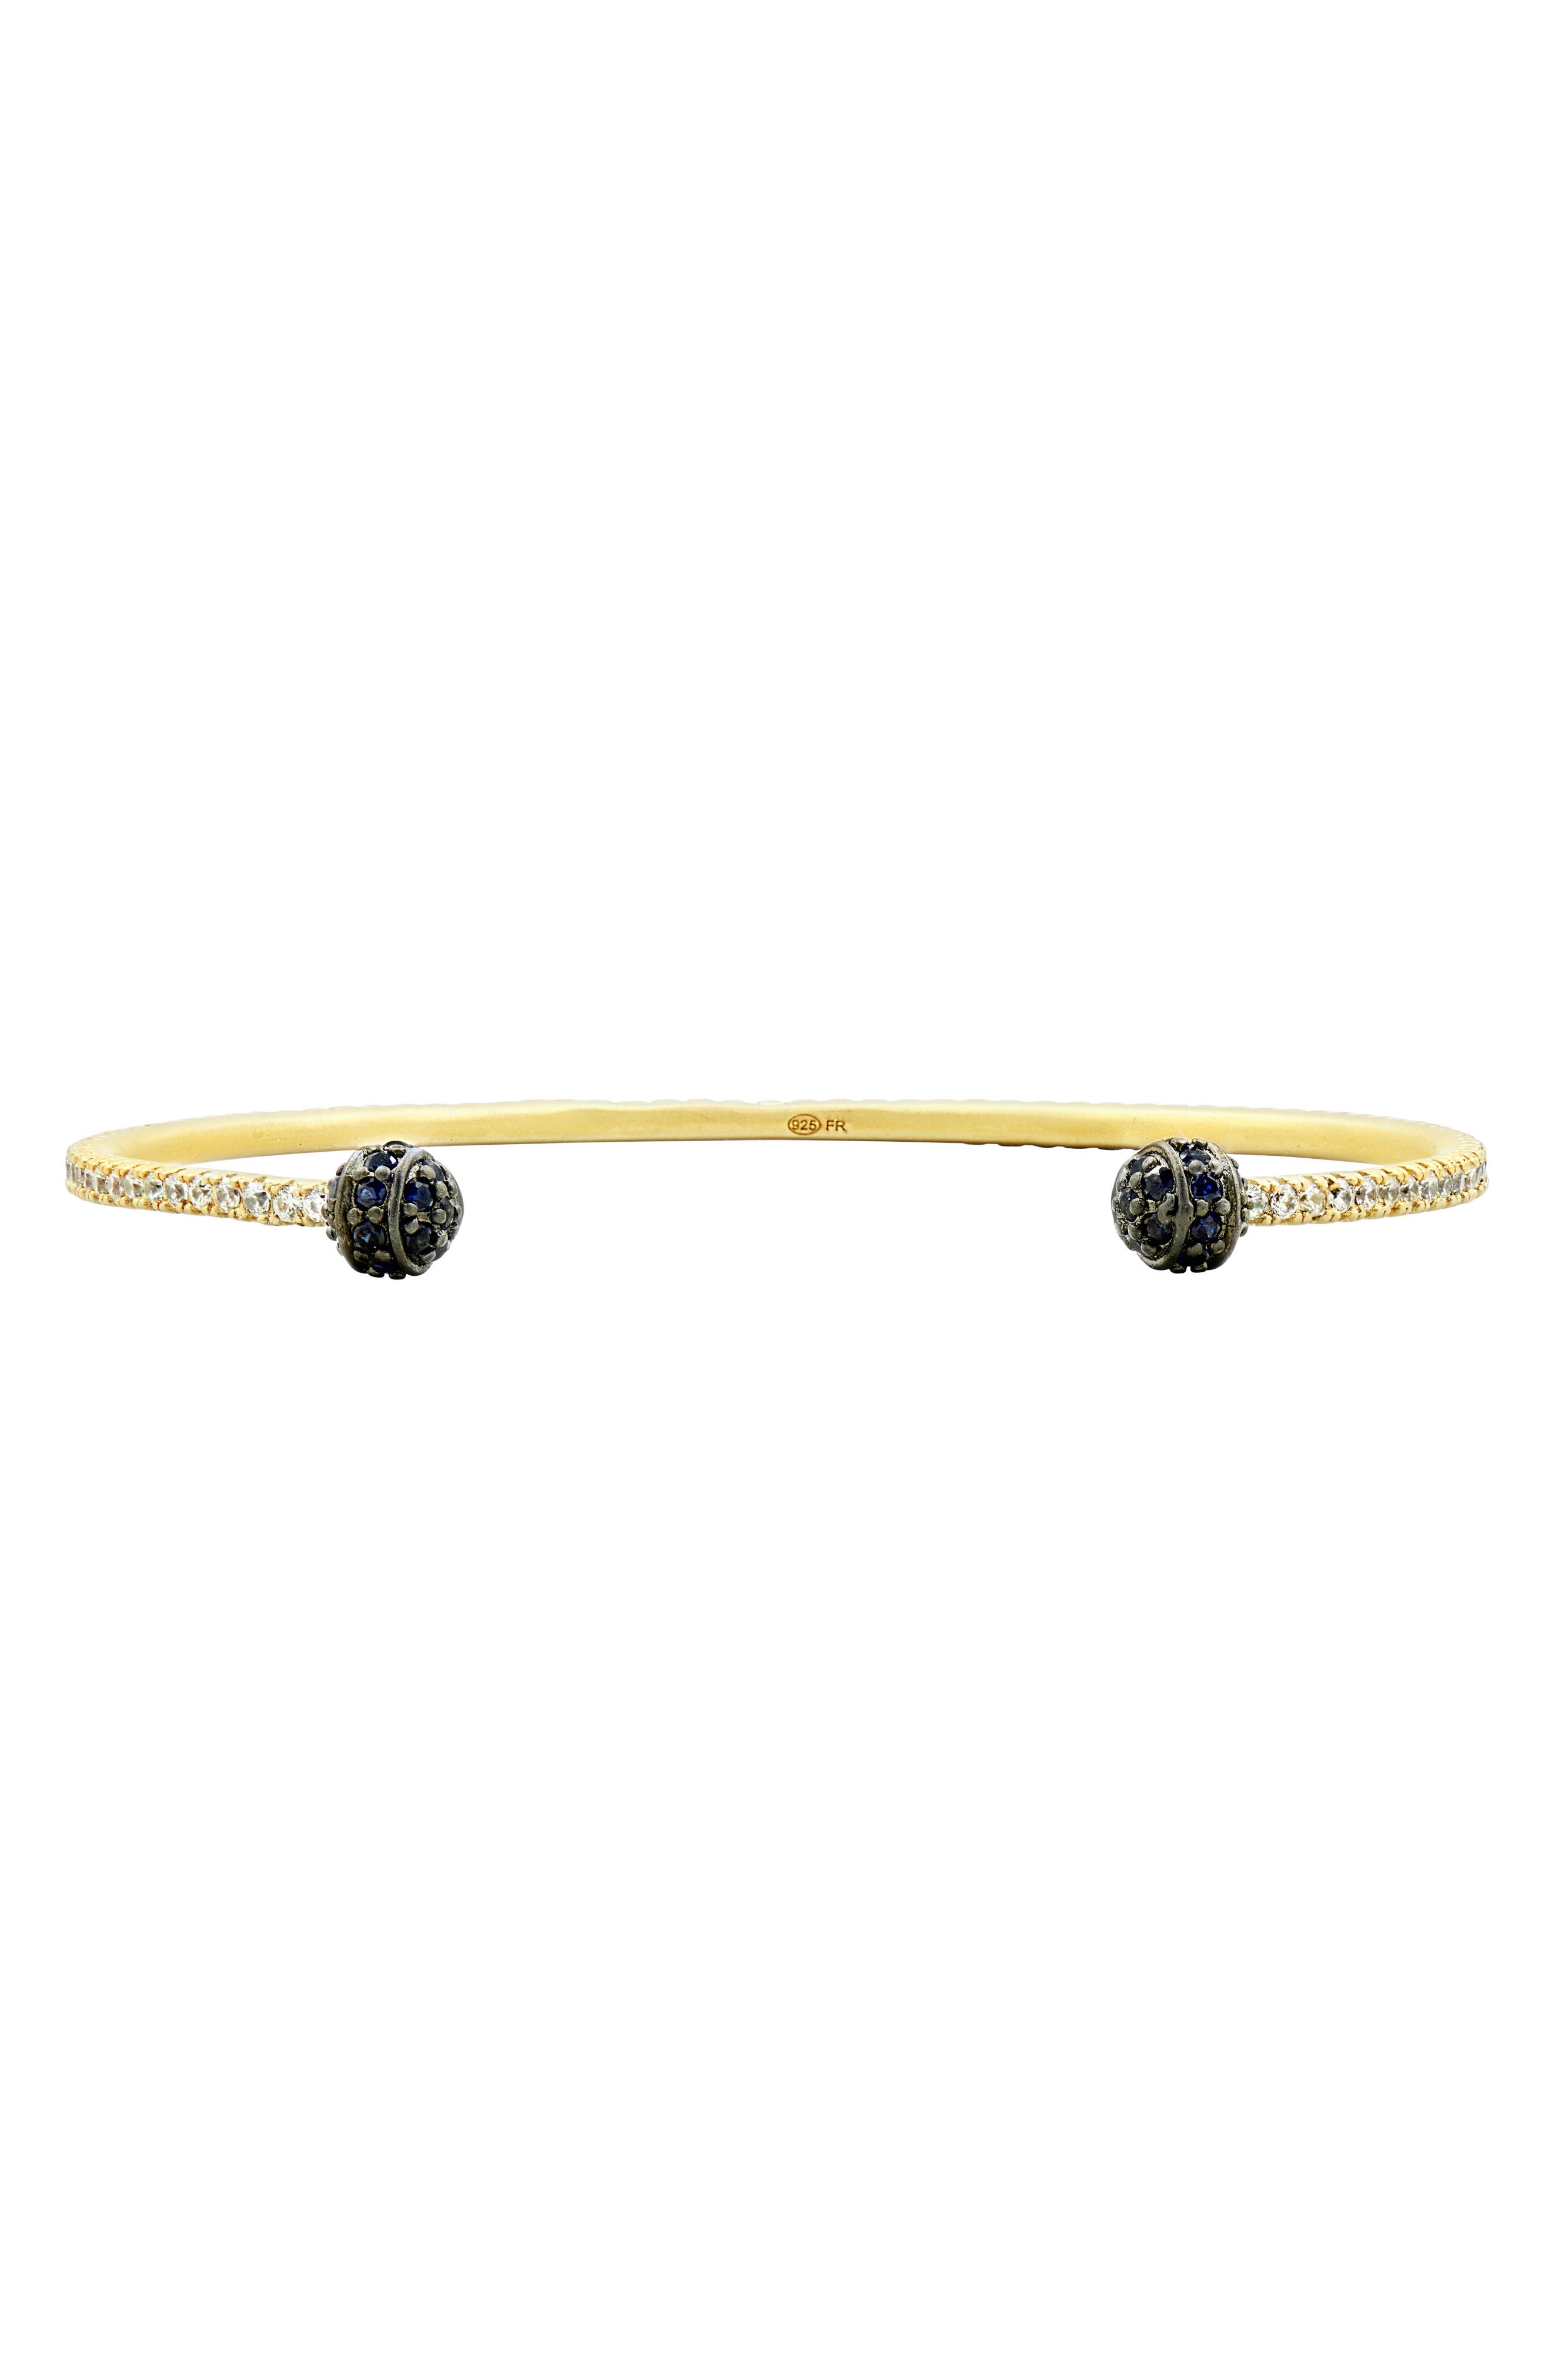 FREIDA ROTHMAN Midnight Pave Thin Open Cuff Bracelet in Gold And Blue at Nordstrom -  YRZB080184B-BL